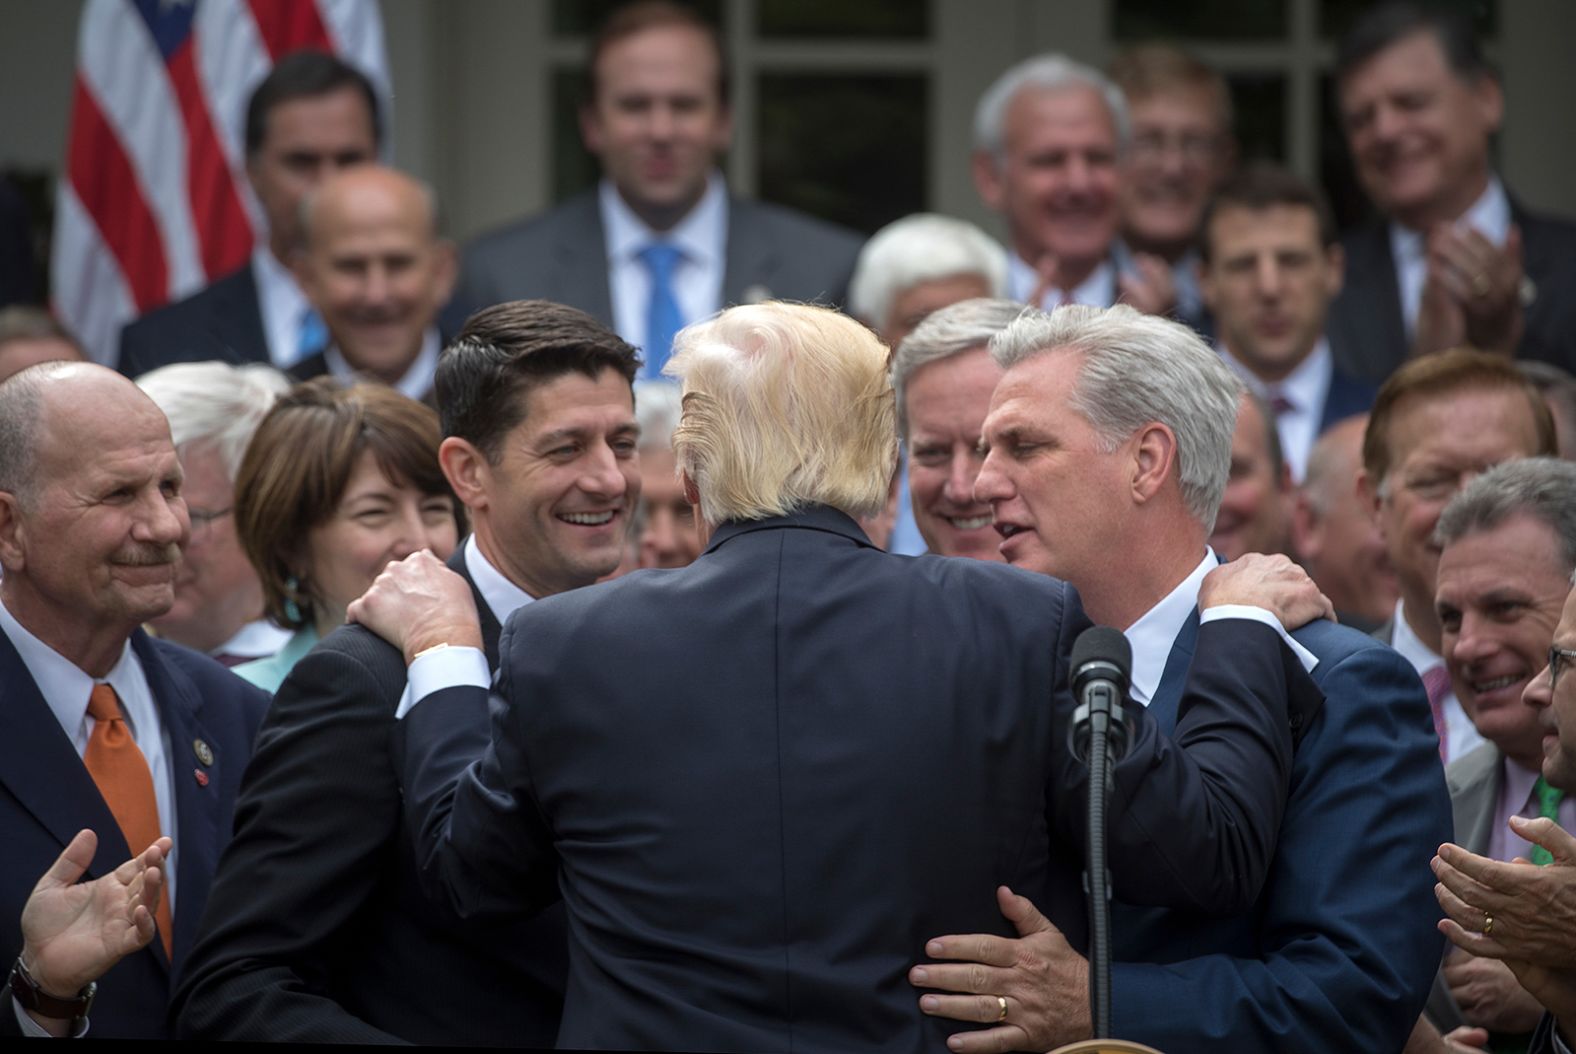 Trump rests his hands on the shoulders of Ryan and McCarthy as Republican leaders celebrated the House's passage of the American Health Care Act in May 2017. The bill failed to make it through the Senate.